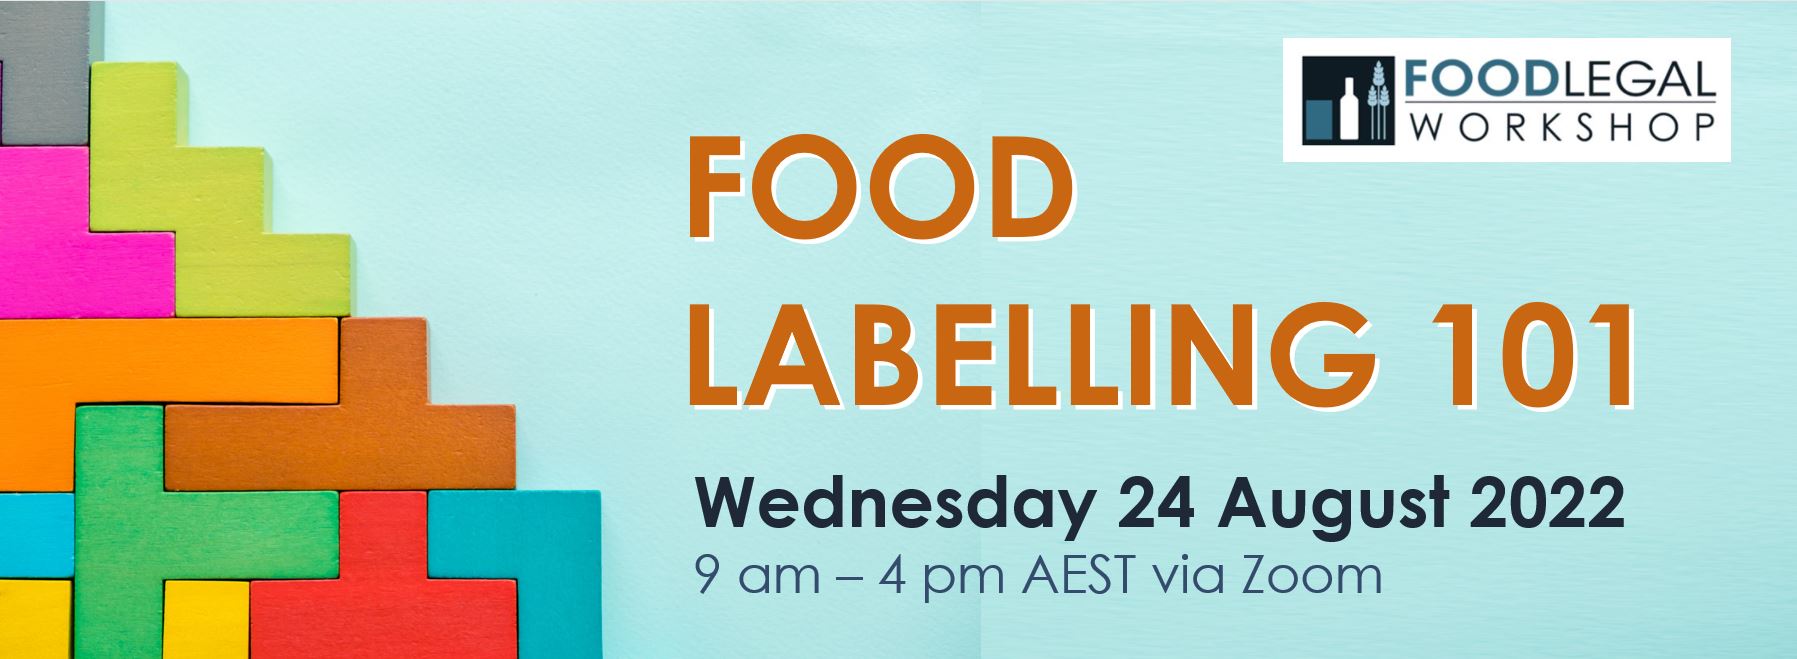  Aug 24, 2022 - Food Labelling 101 - full day workshop - 7 Hours